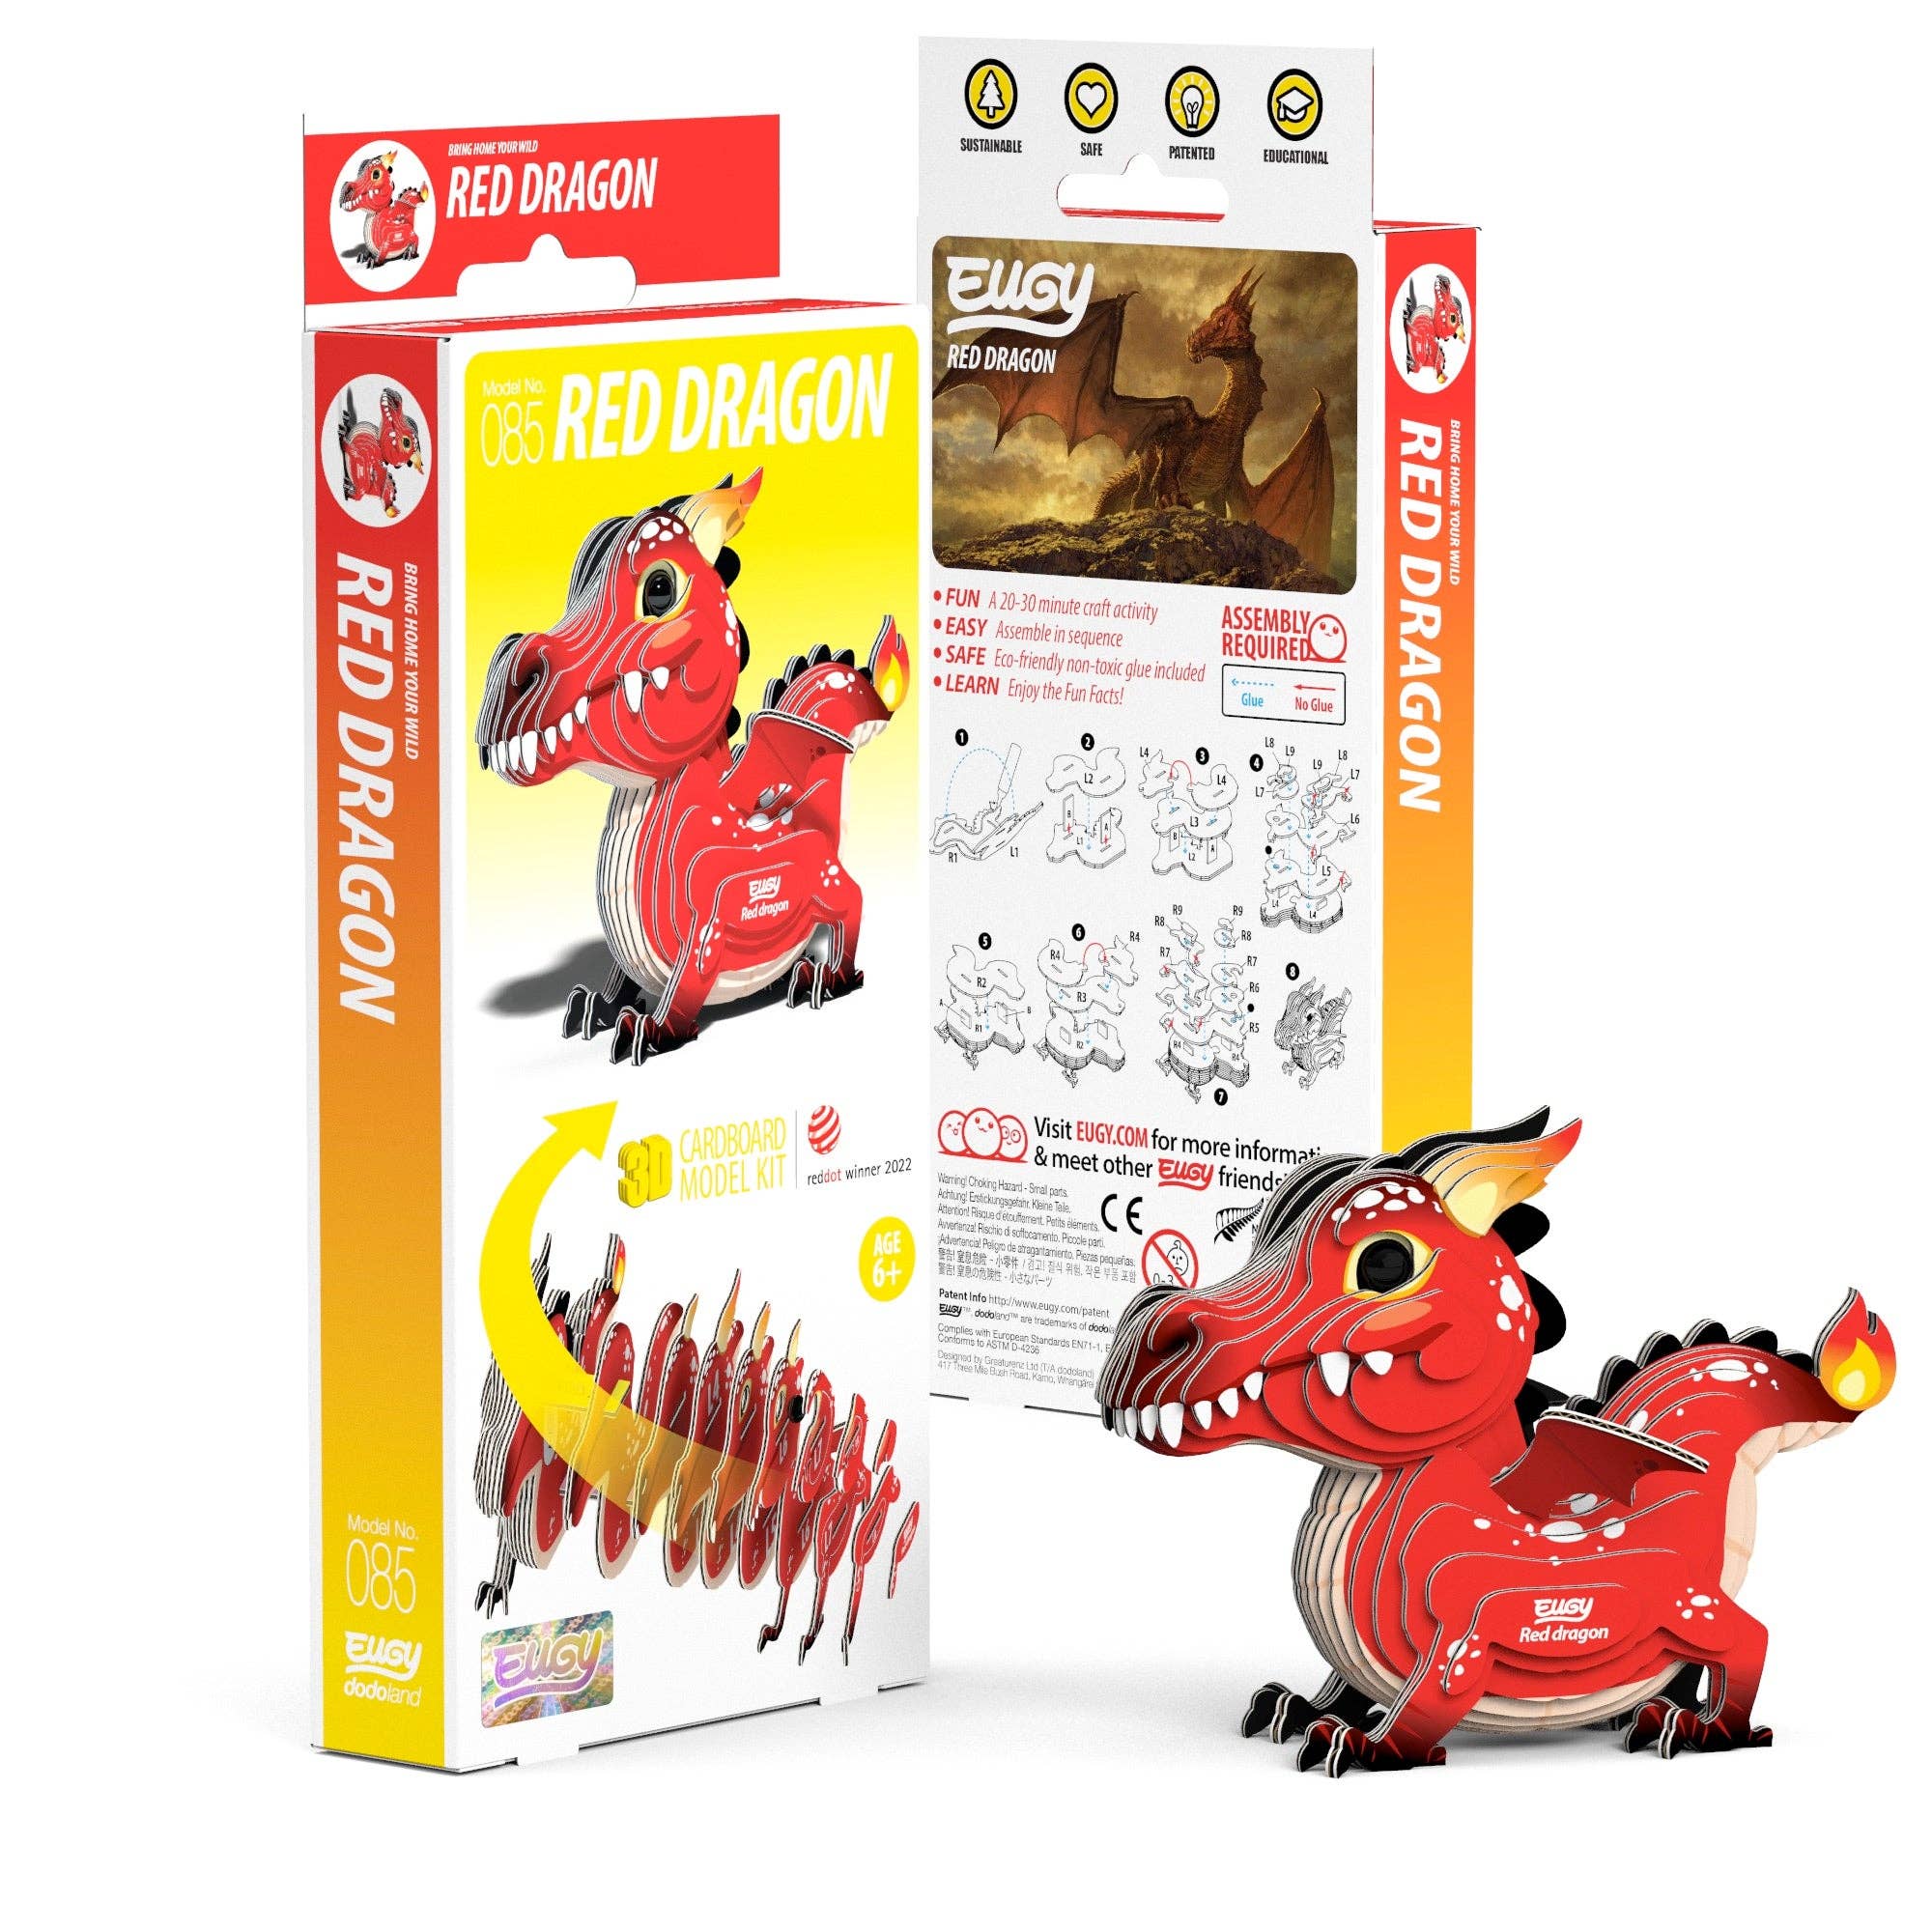 Two packages of the Red Dragon puzzle next to eachother, one box is diplaying the front of the packaging. The other box is displaying the back of the packaging. A finished model is sitting infront of the two boxes.